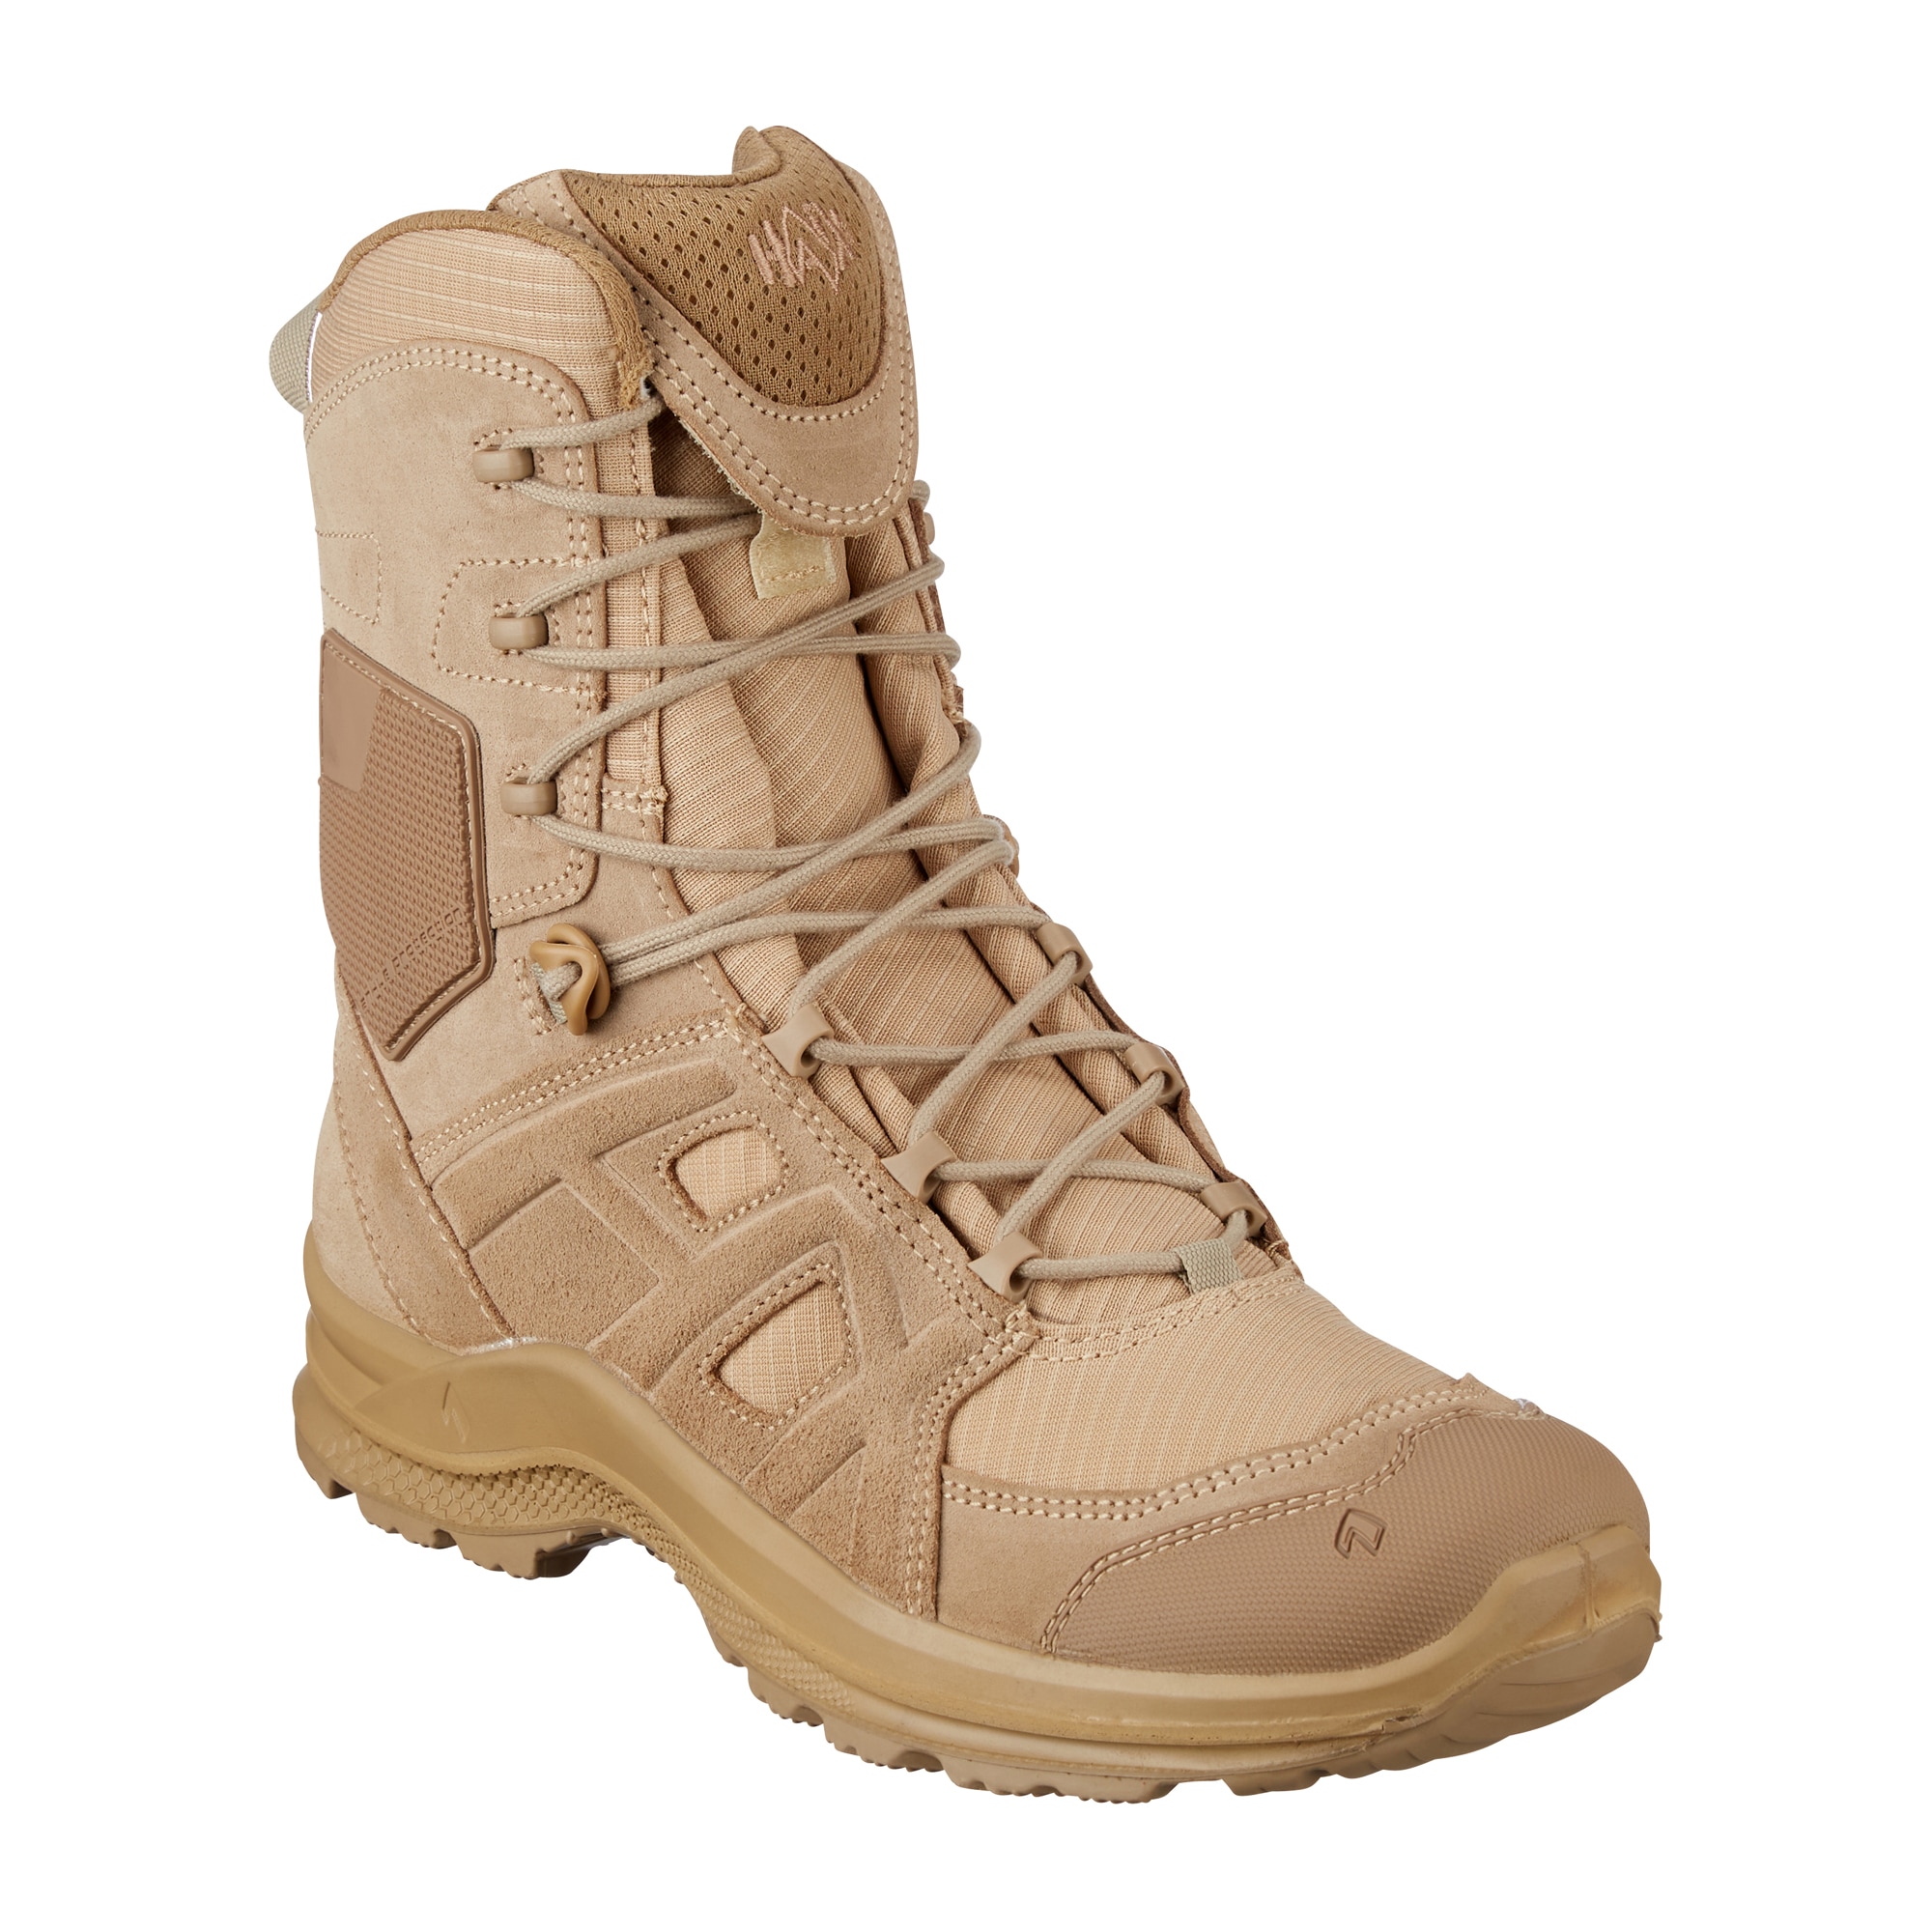 Purchase the Haix Tactical Boots Black 